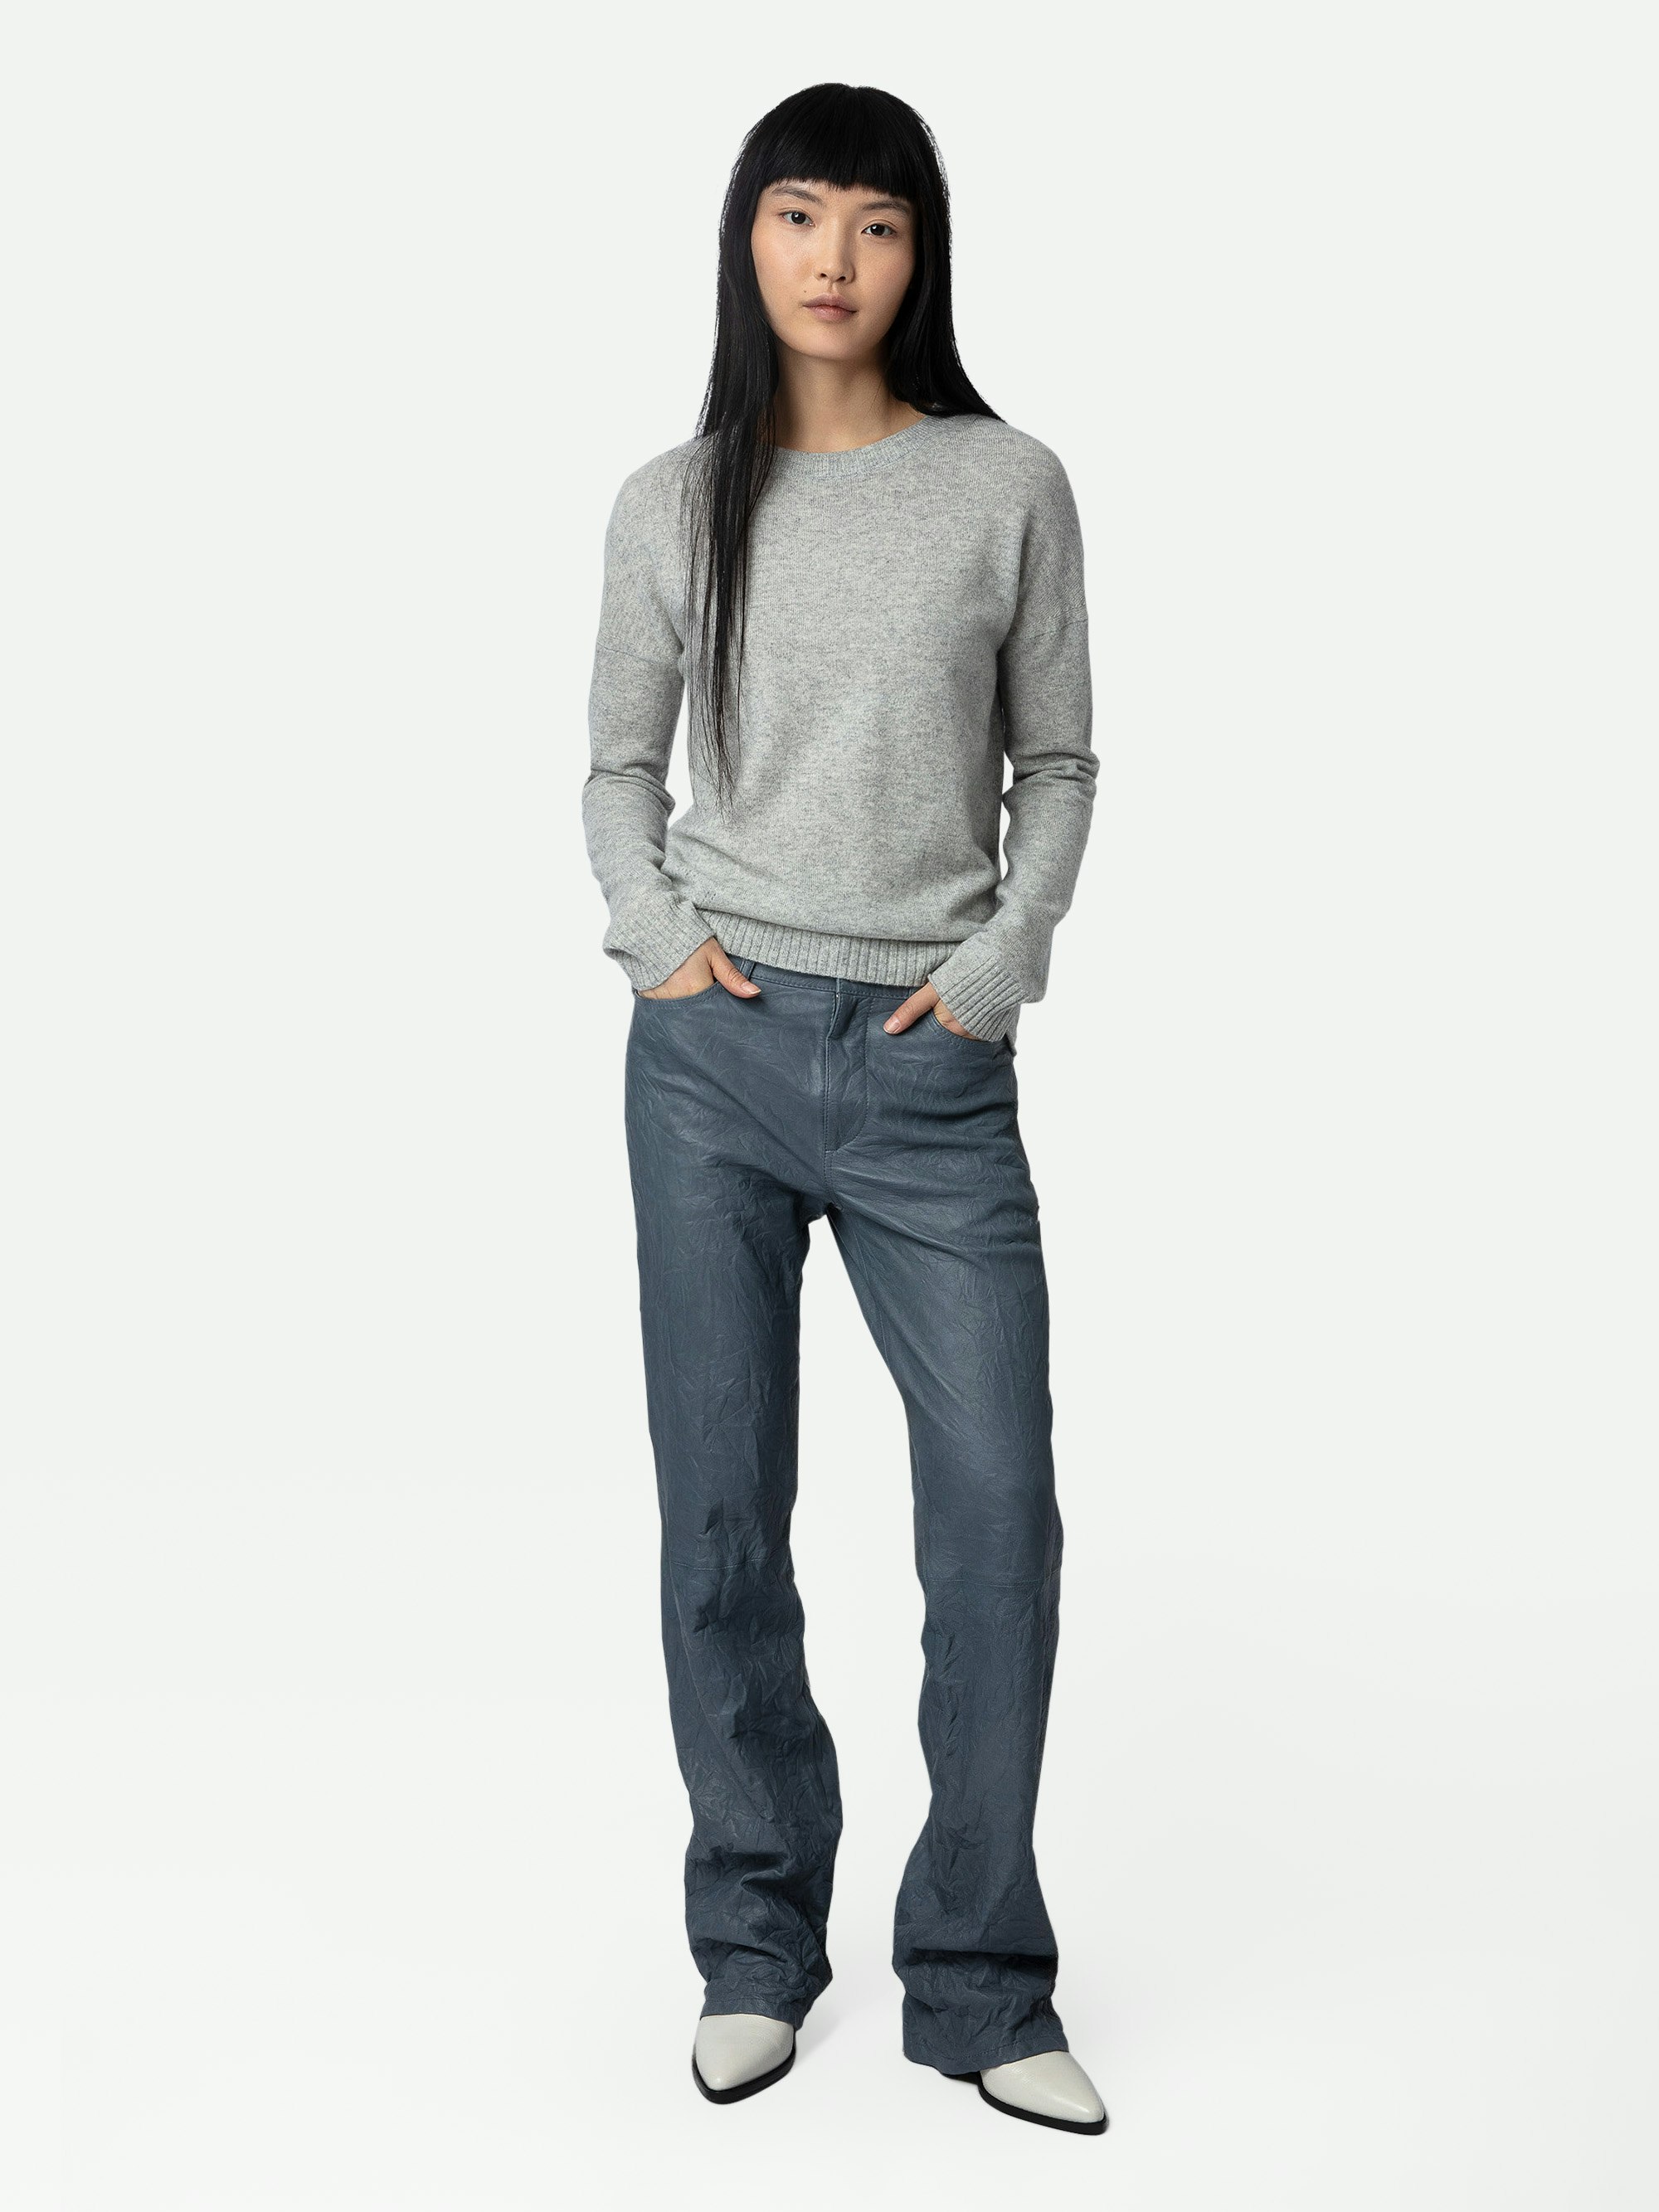 Cici Patch Cashmere Sweater - Women’s grey cashmere sweater with star patch embroidered on elbows.